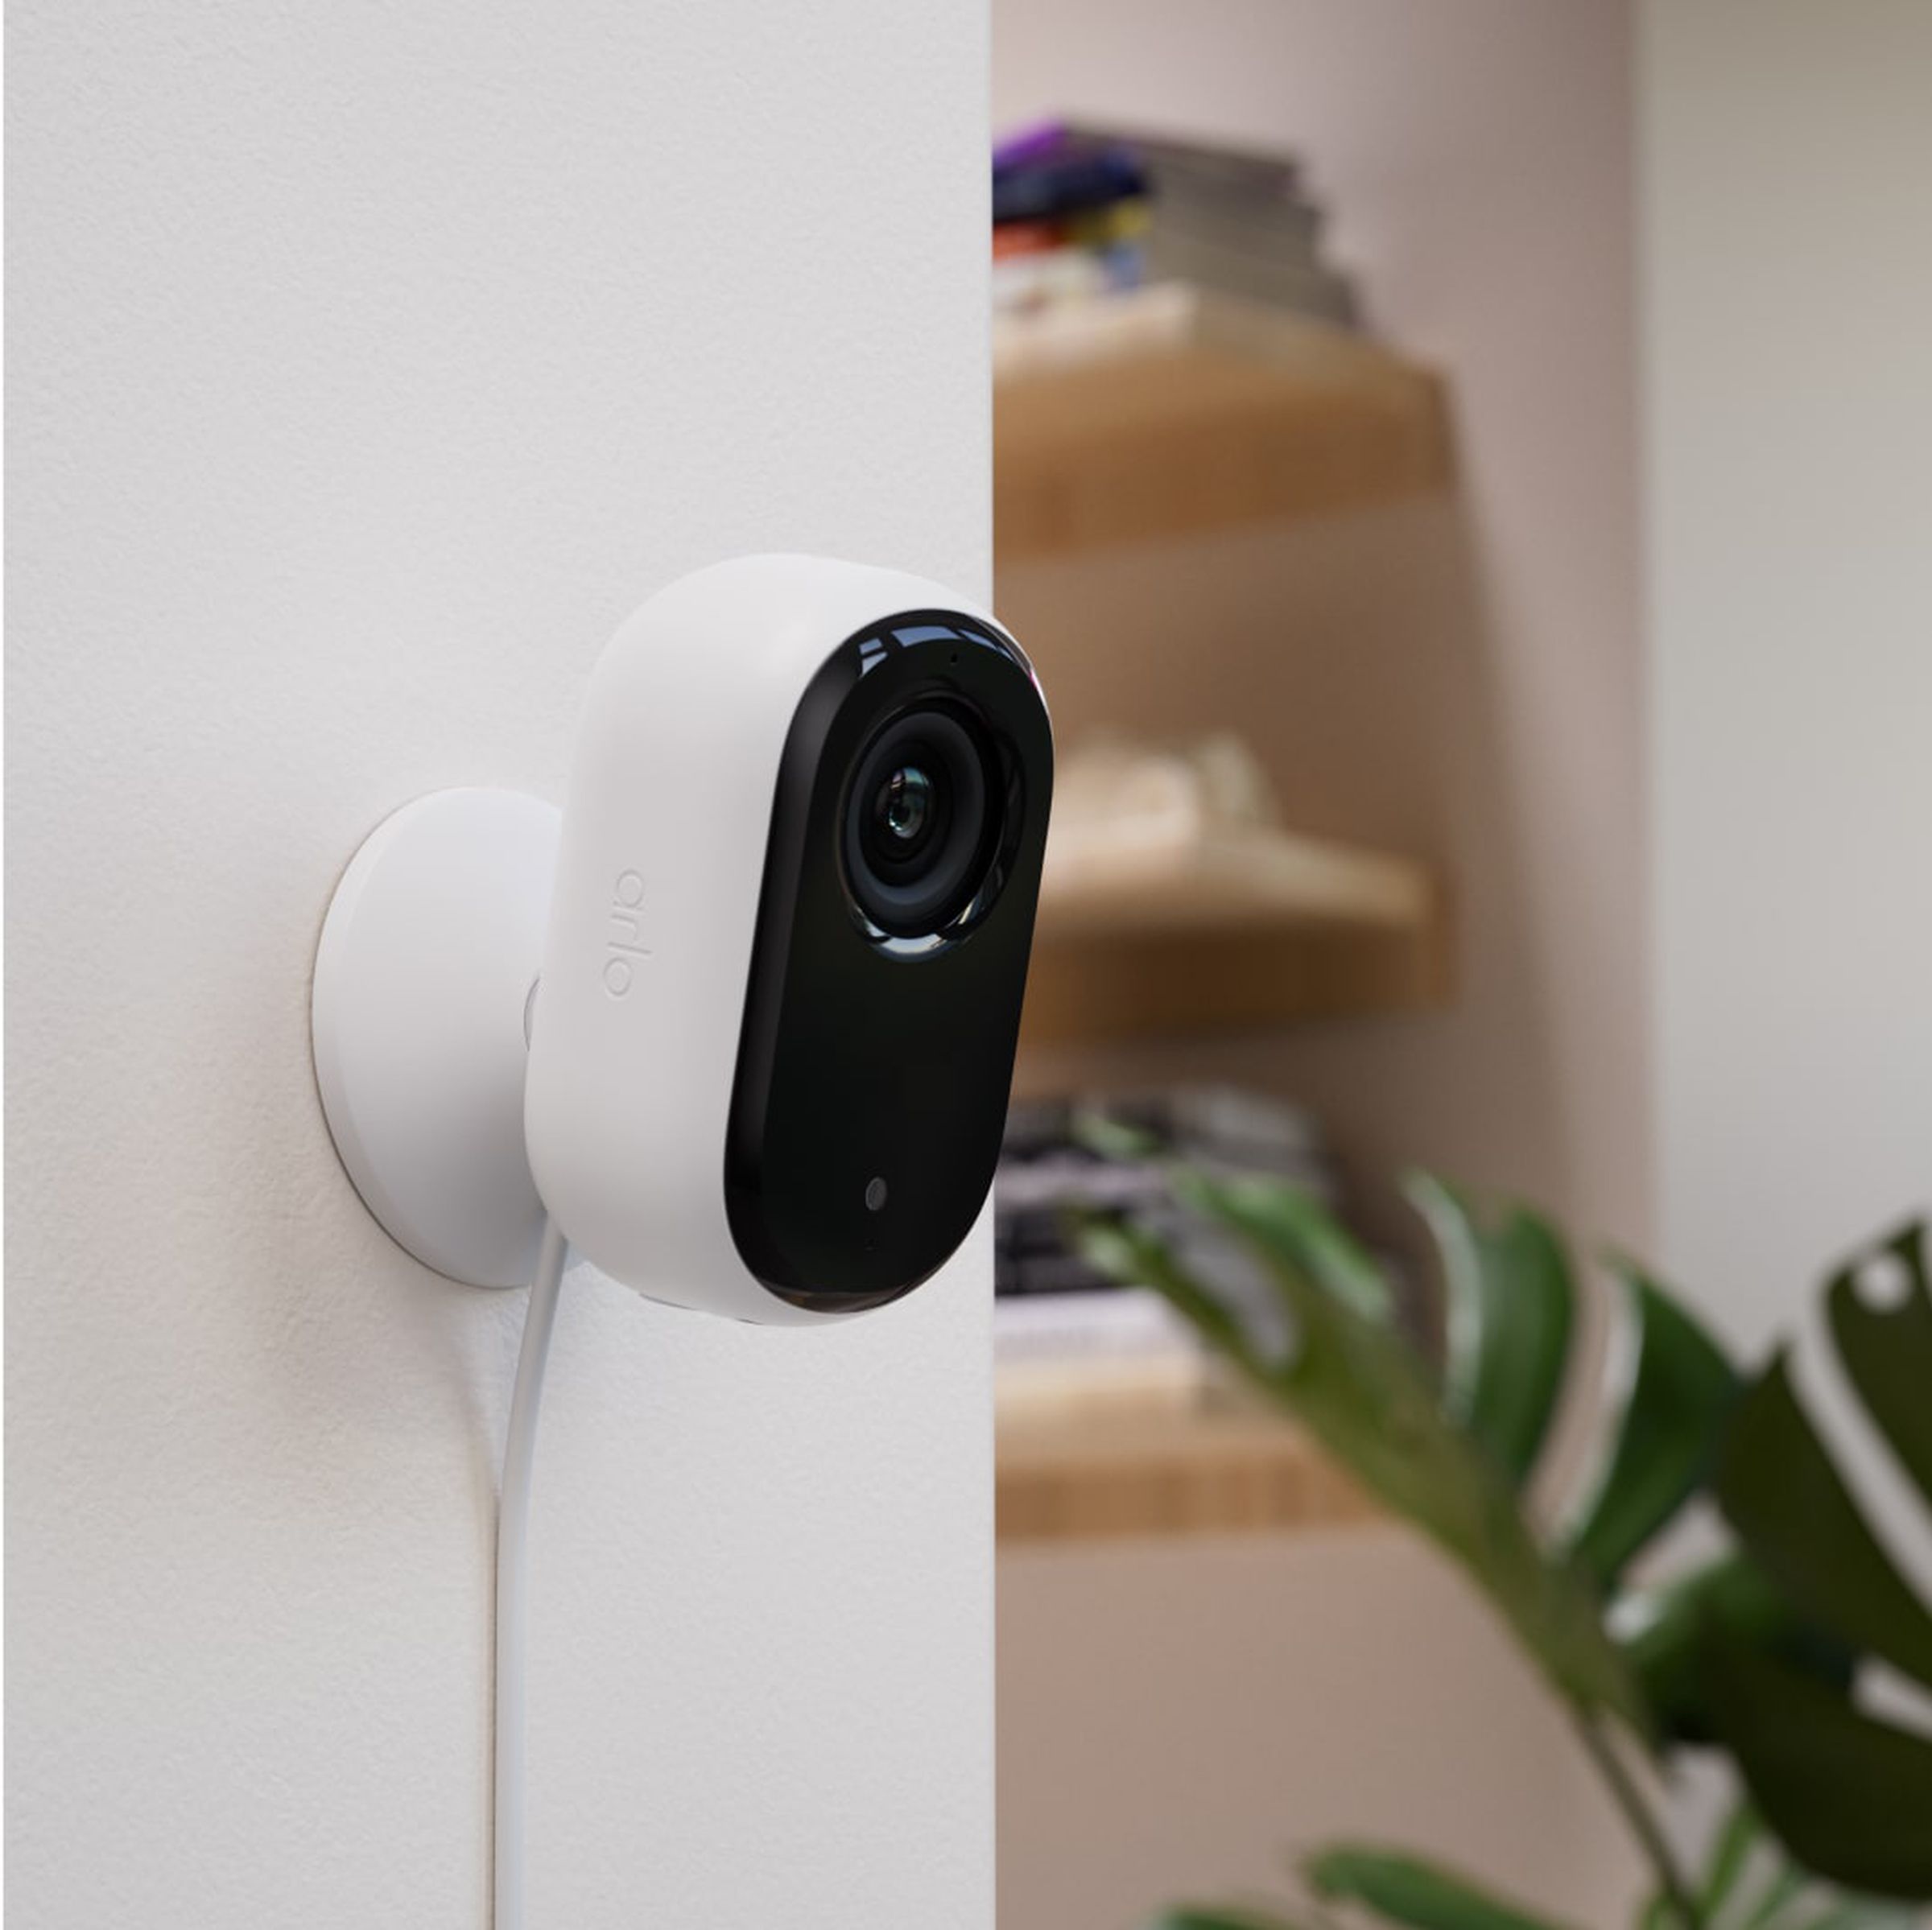 Arlo’s Essential indoor camera (second-gen) features an automated privacy shield.